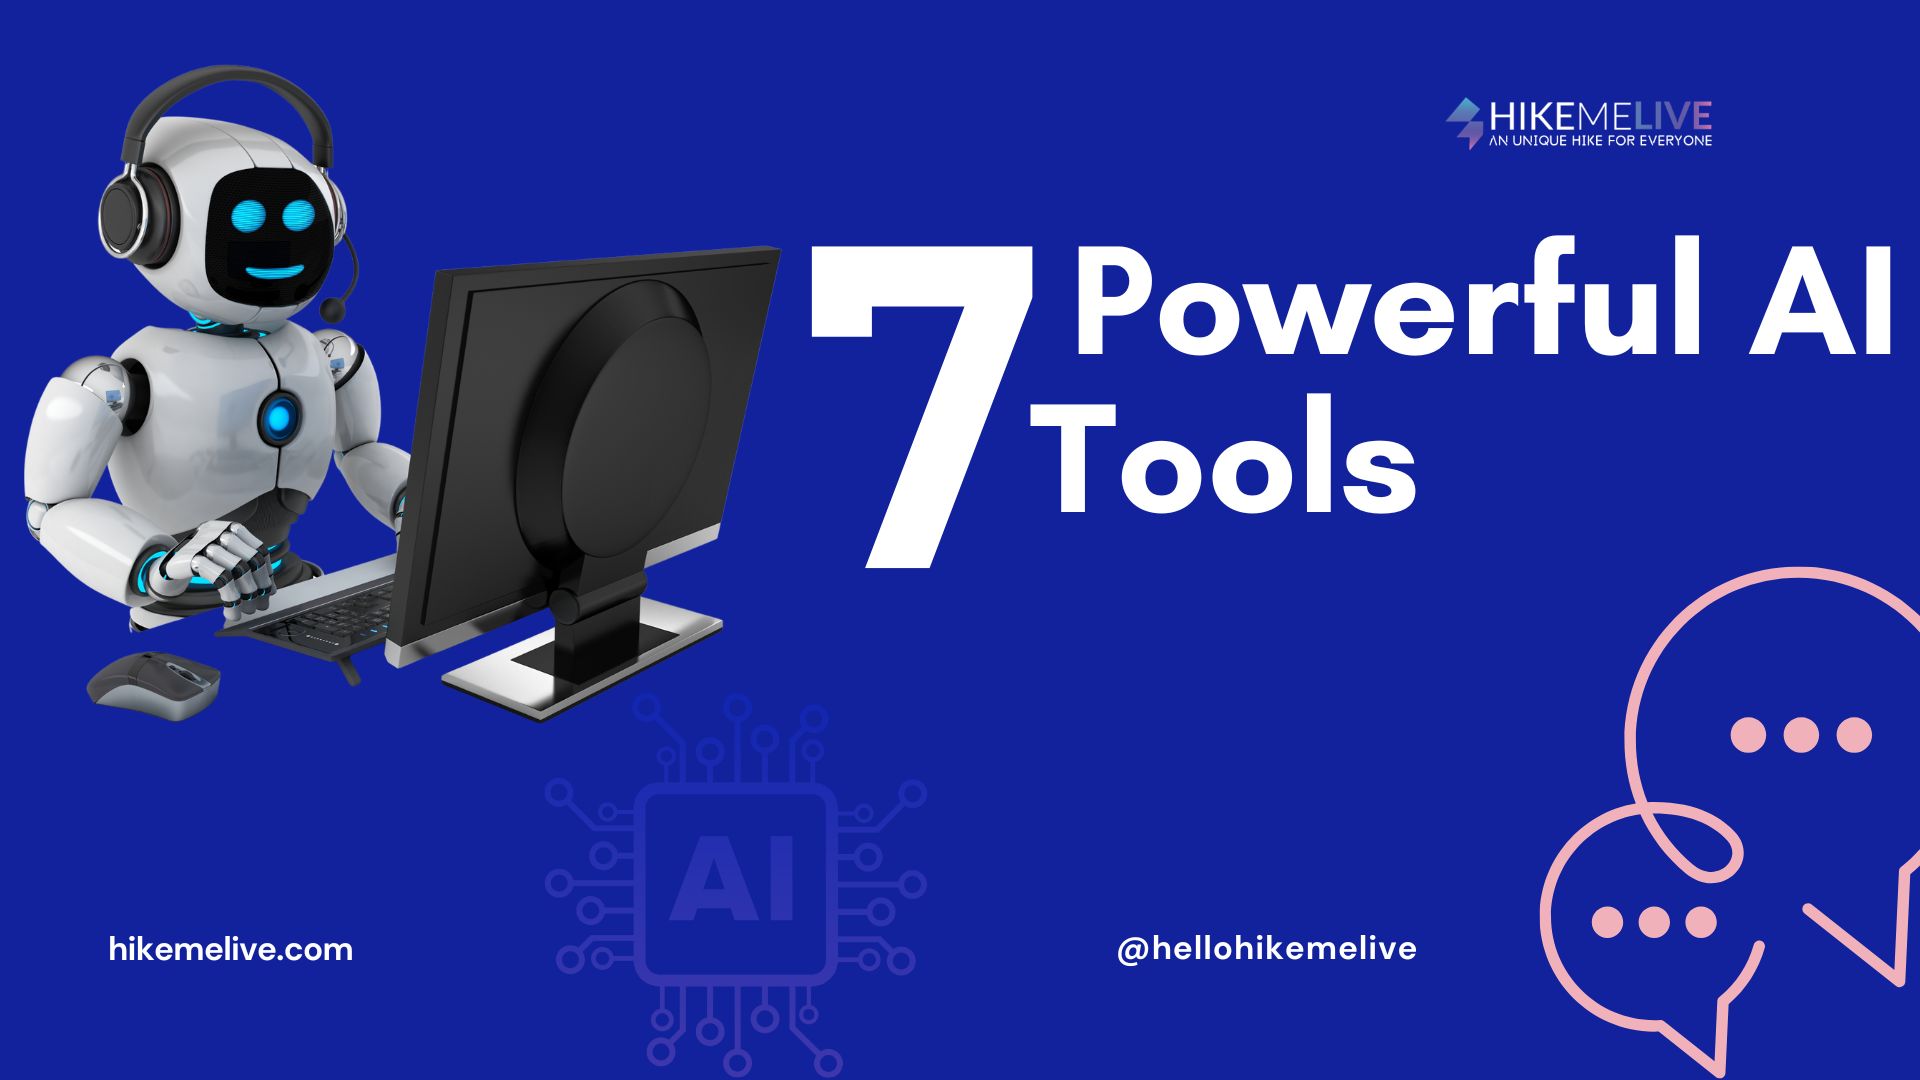 7+ Powerful AI Tools to Supercharge Your Writing